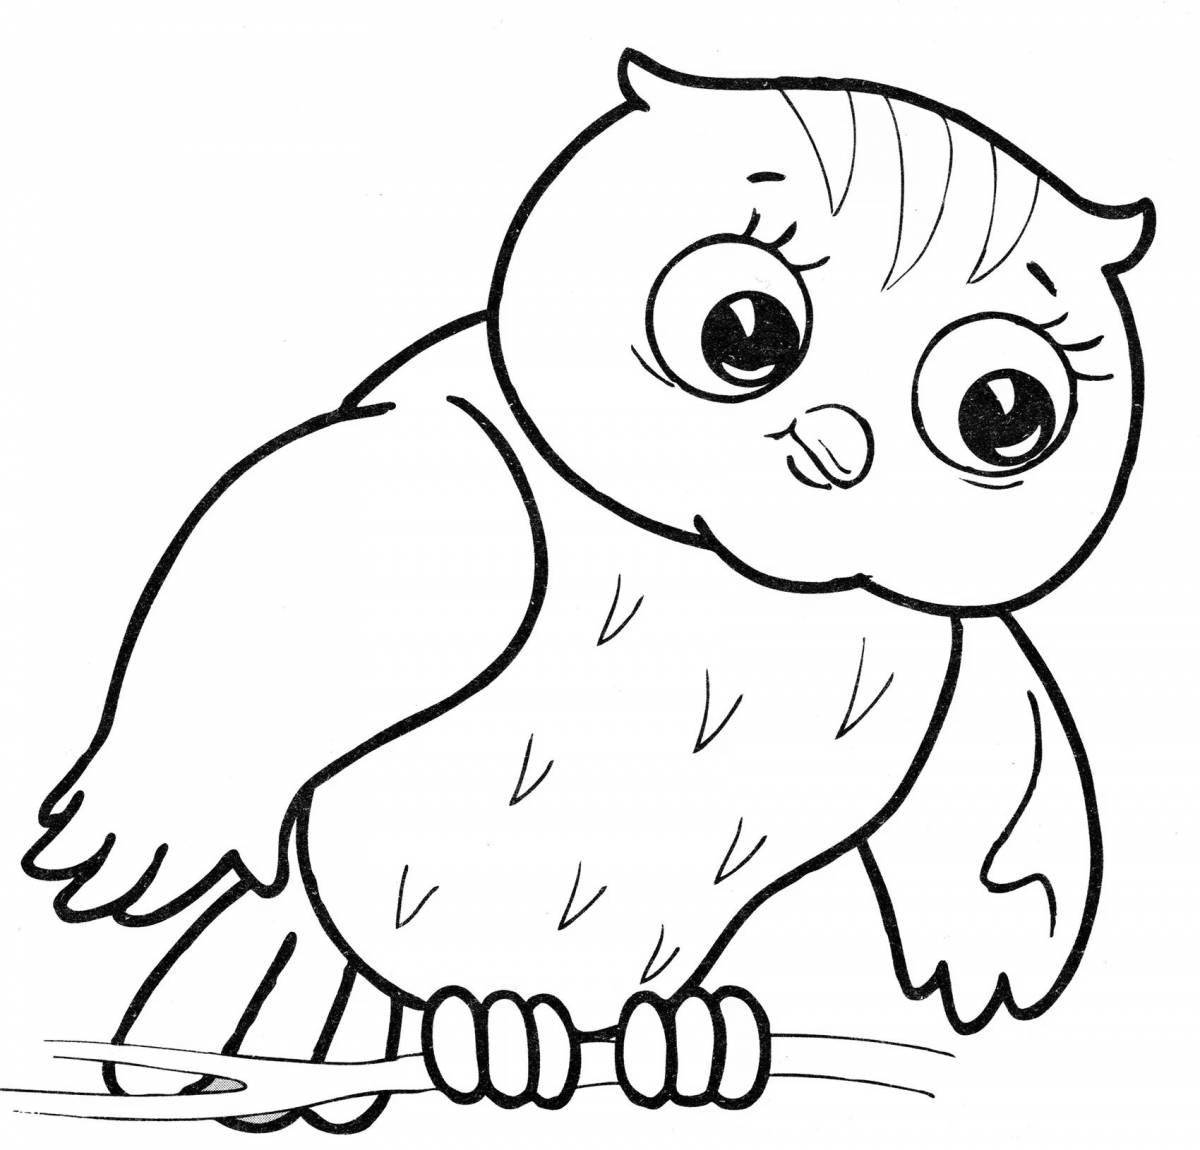 Shiny Owlet Coloring Page for Juniors